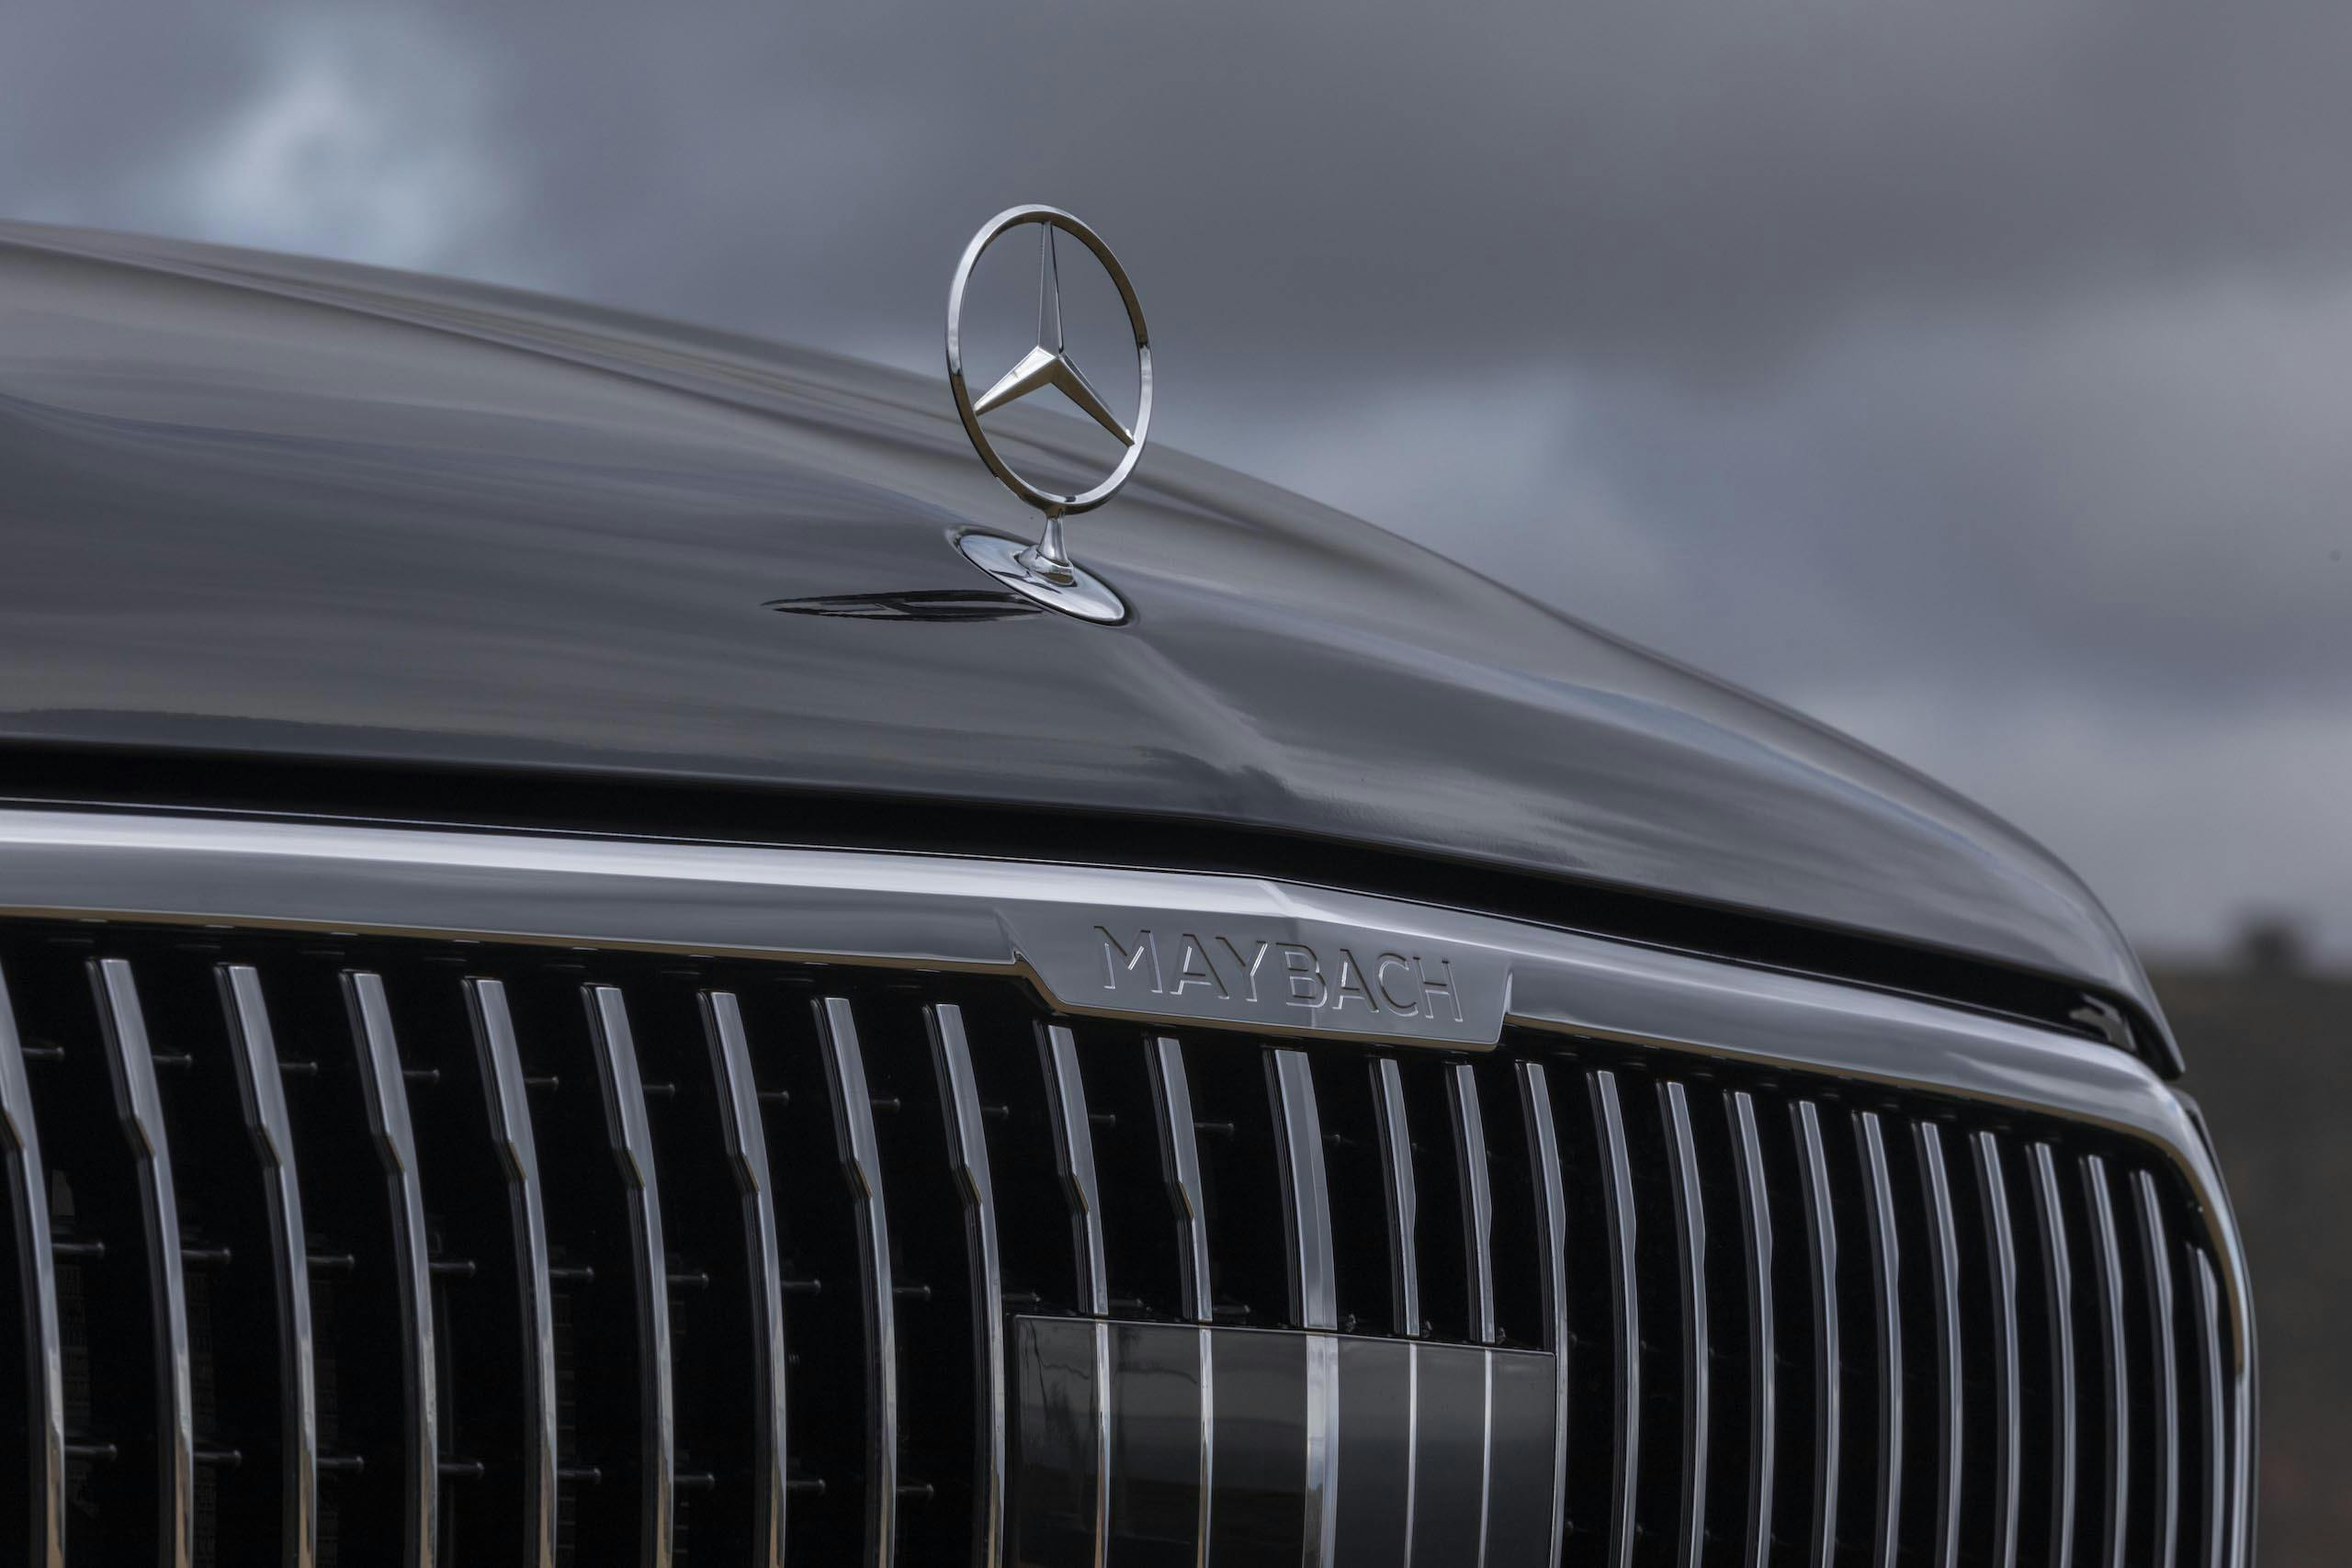 Mercedes-Maybach GLS 600 front grilled and emblem detail